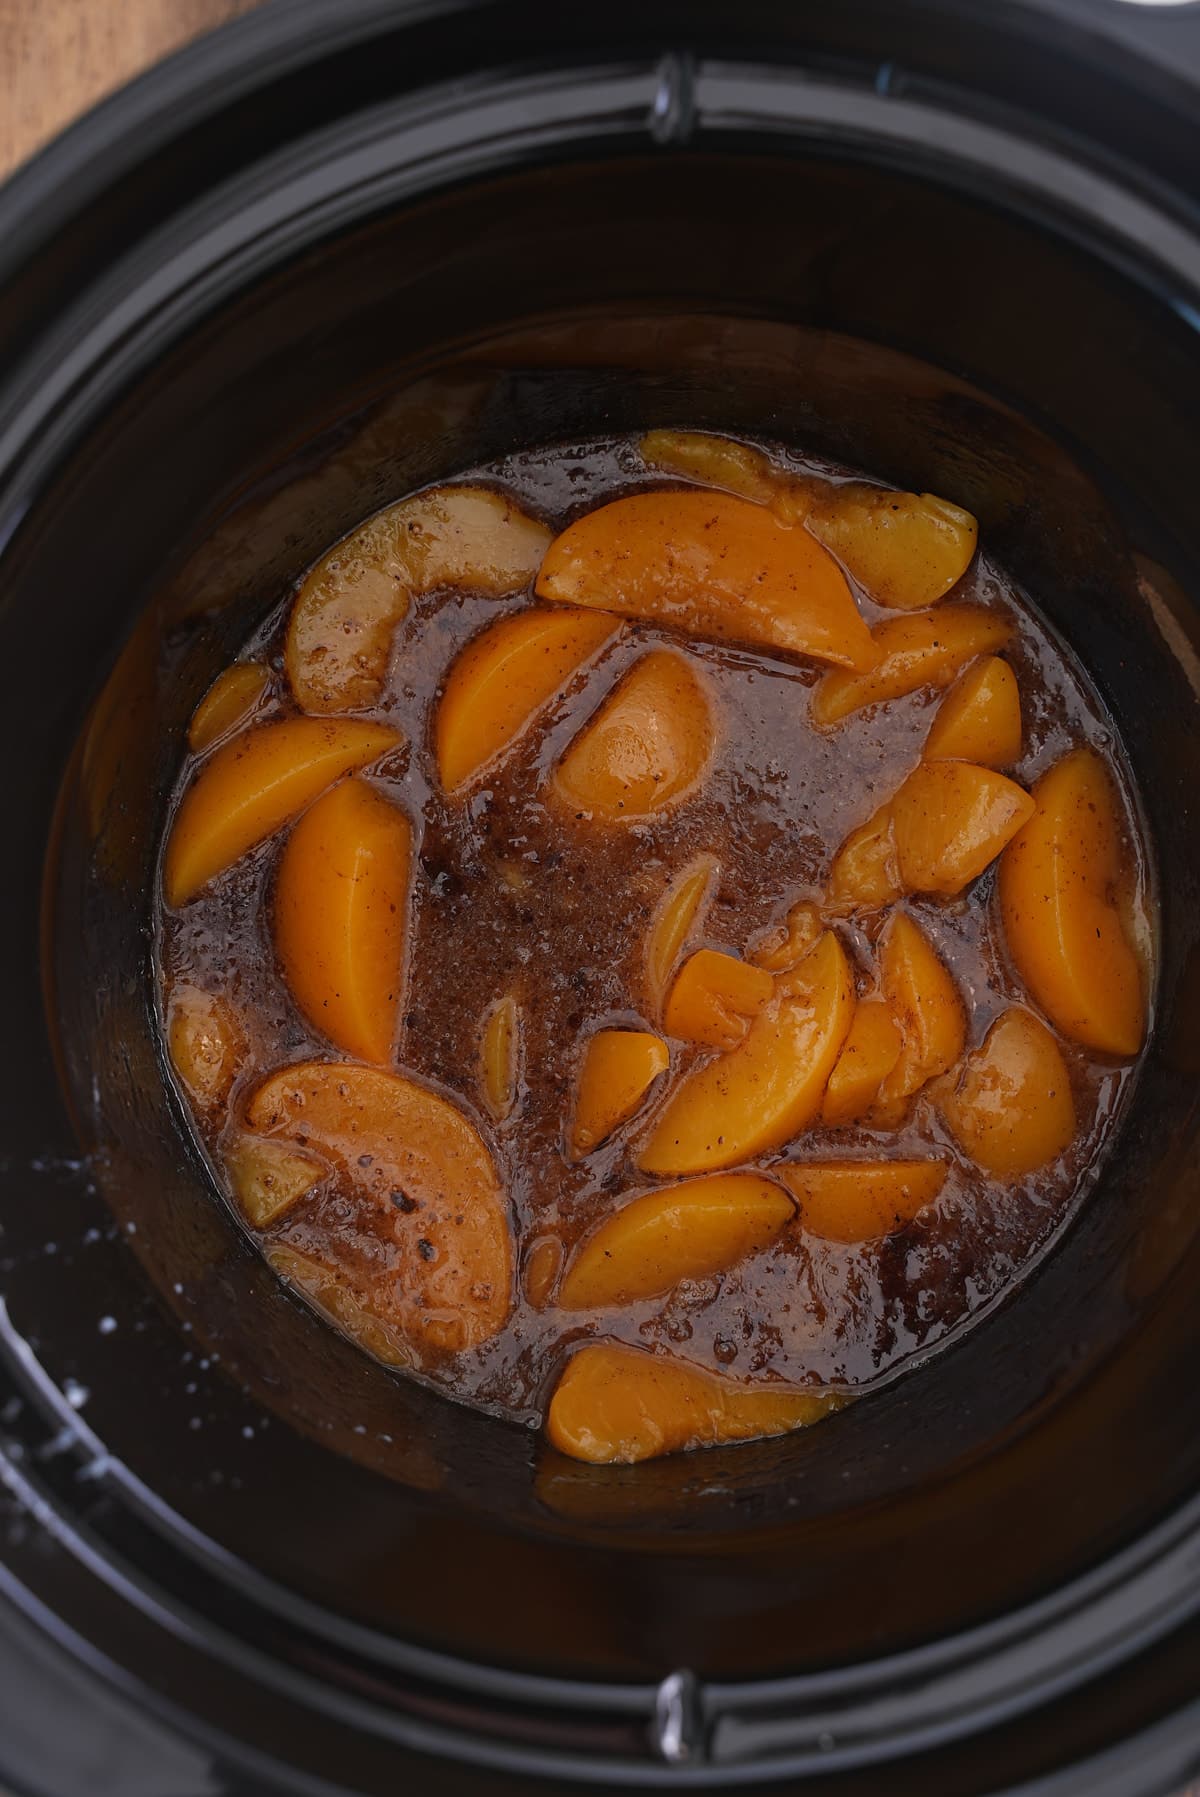 Peaches placed in the bottom of the slow cooker.